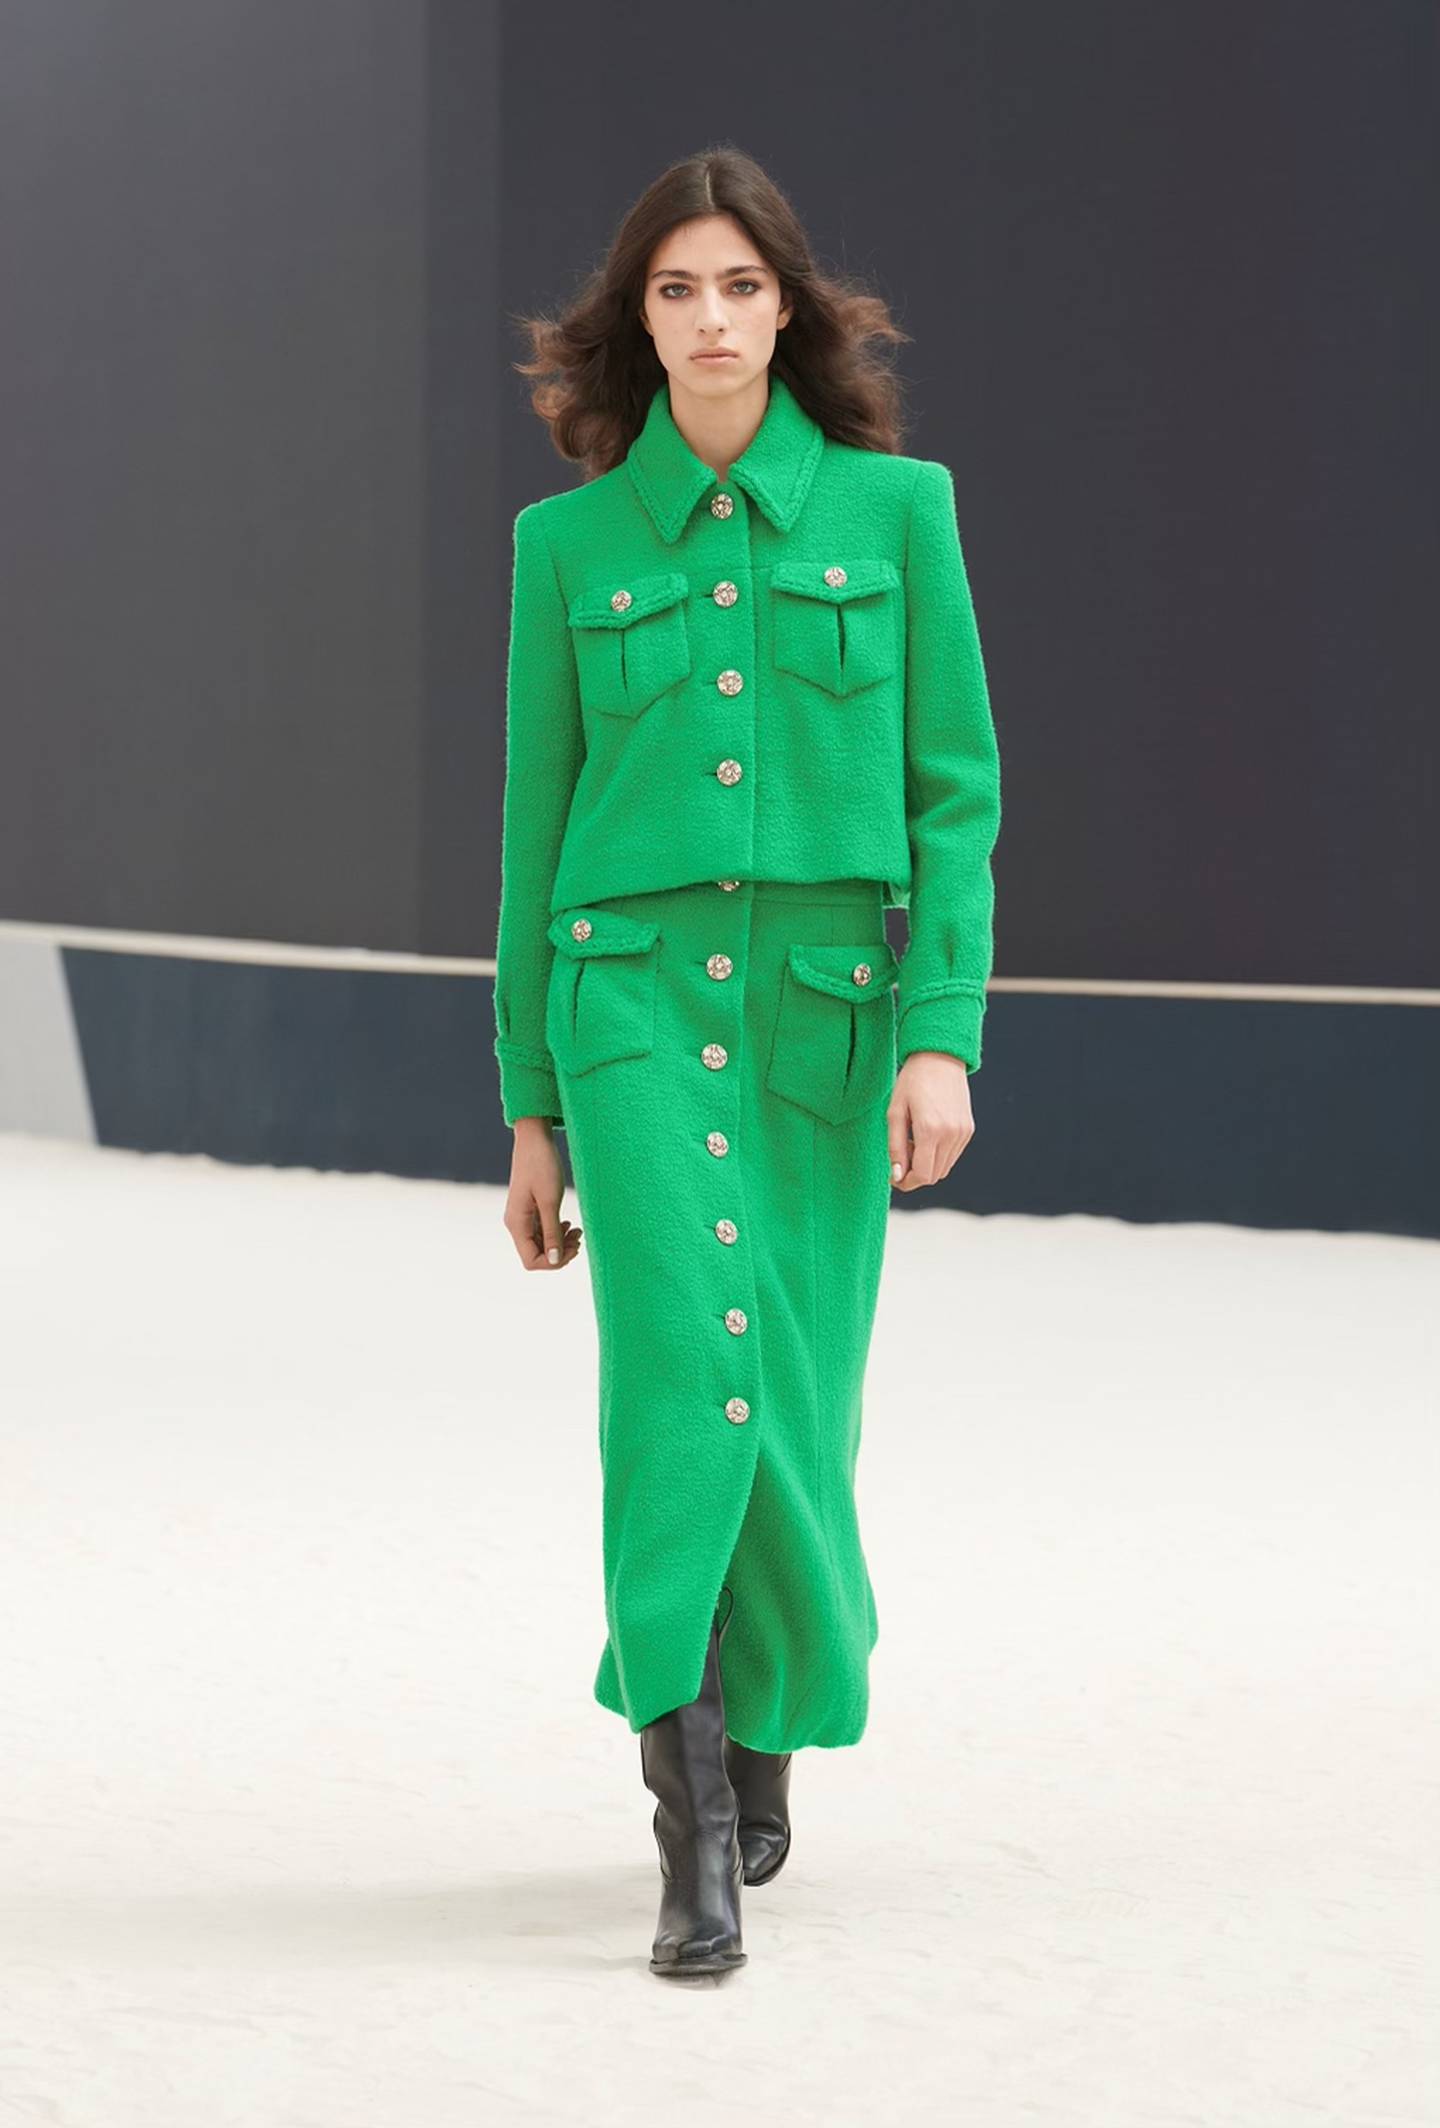 A model wears a green long sleeved blazer with a matching maxi skirt with gold buttons down the middle. The tweed outfit is paired with black heeled boots.